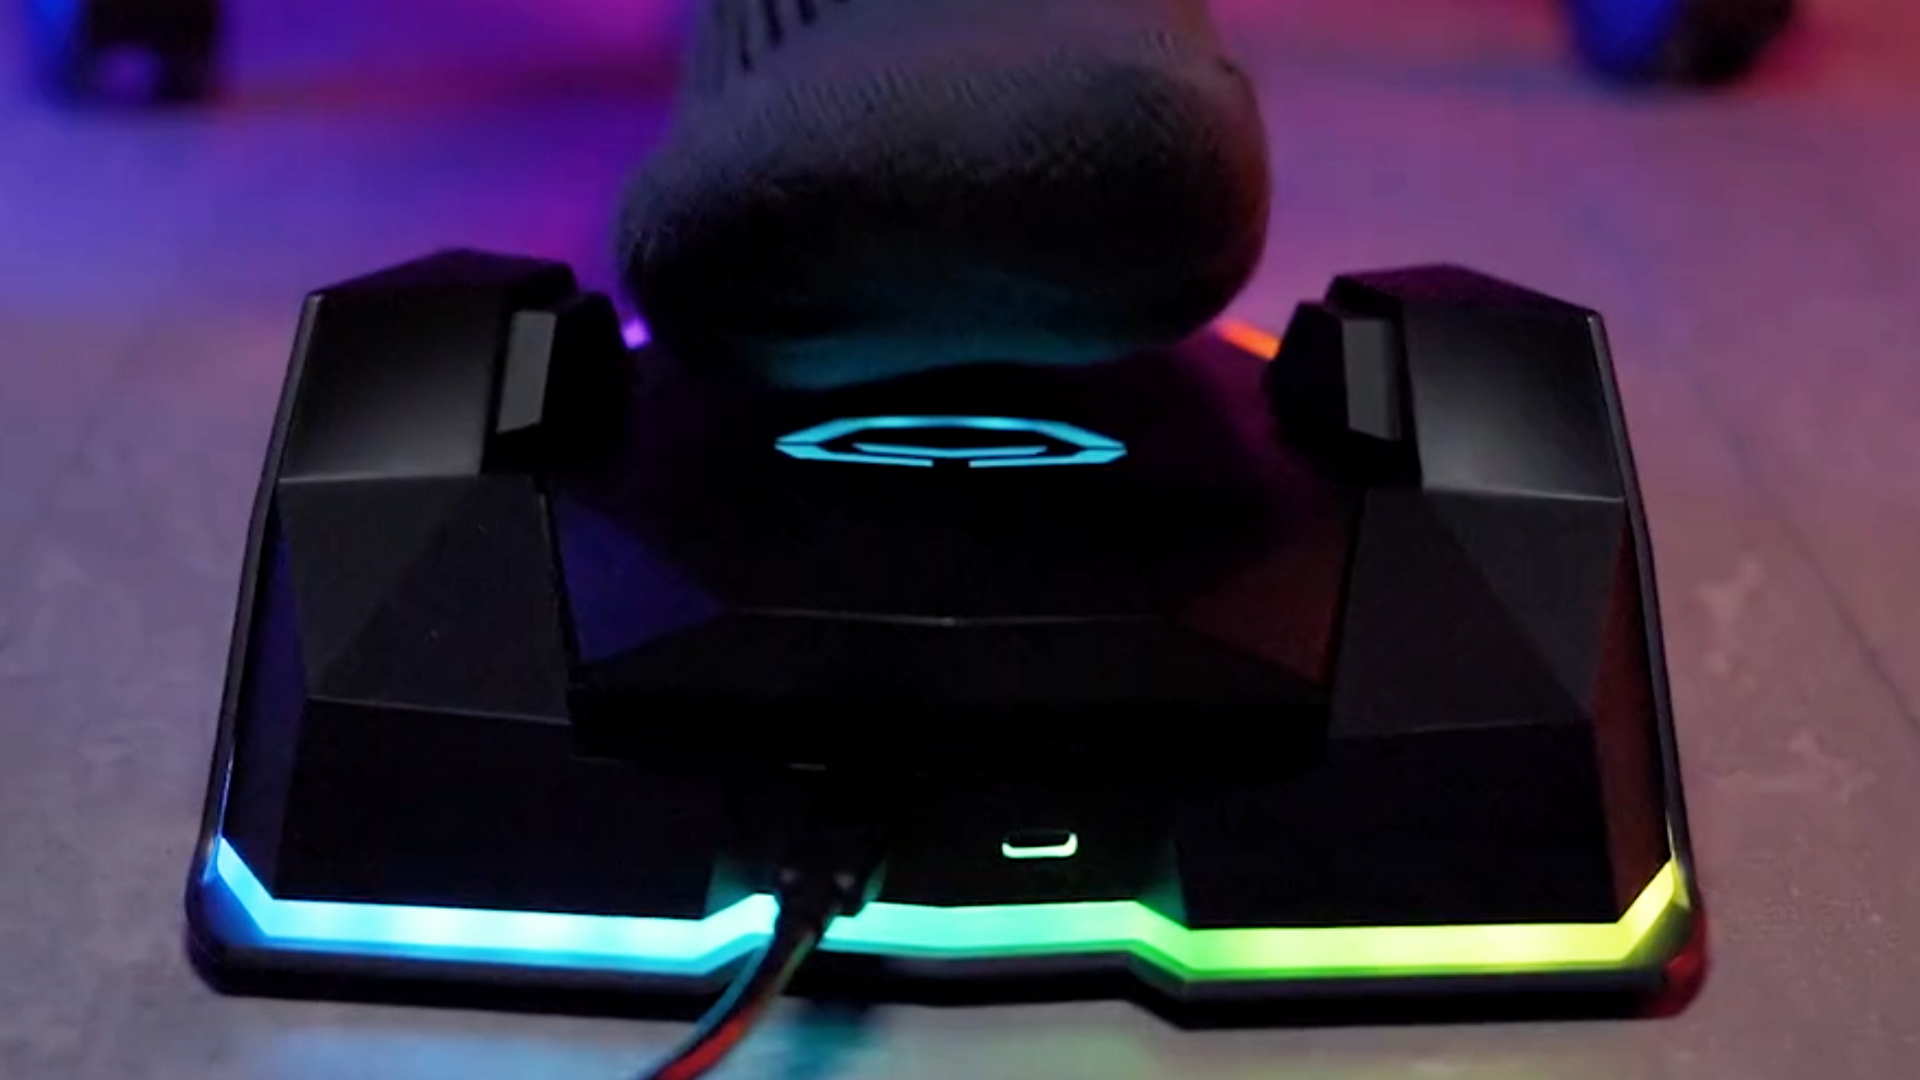 MSI turns your gaming PC into a drum kit with an RGB foot pedal